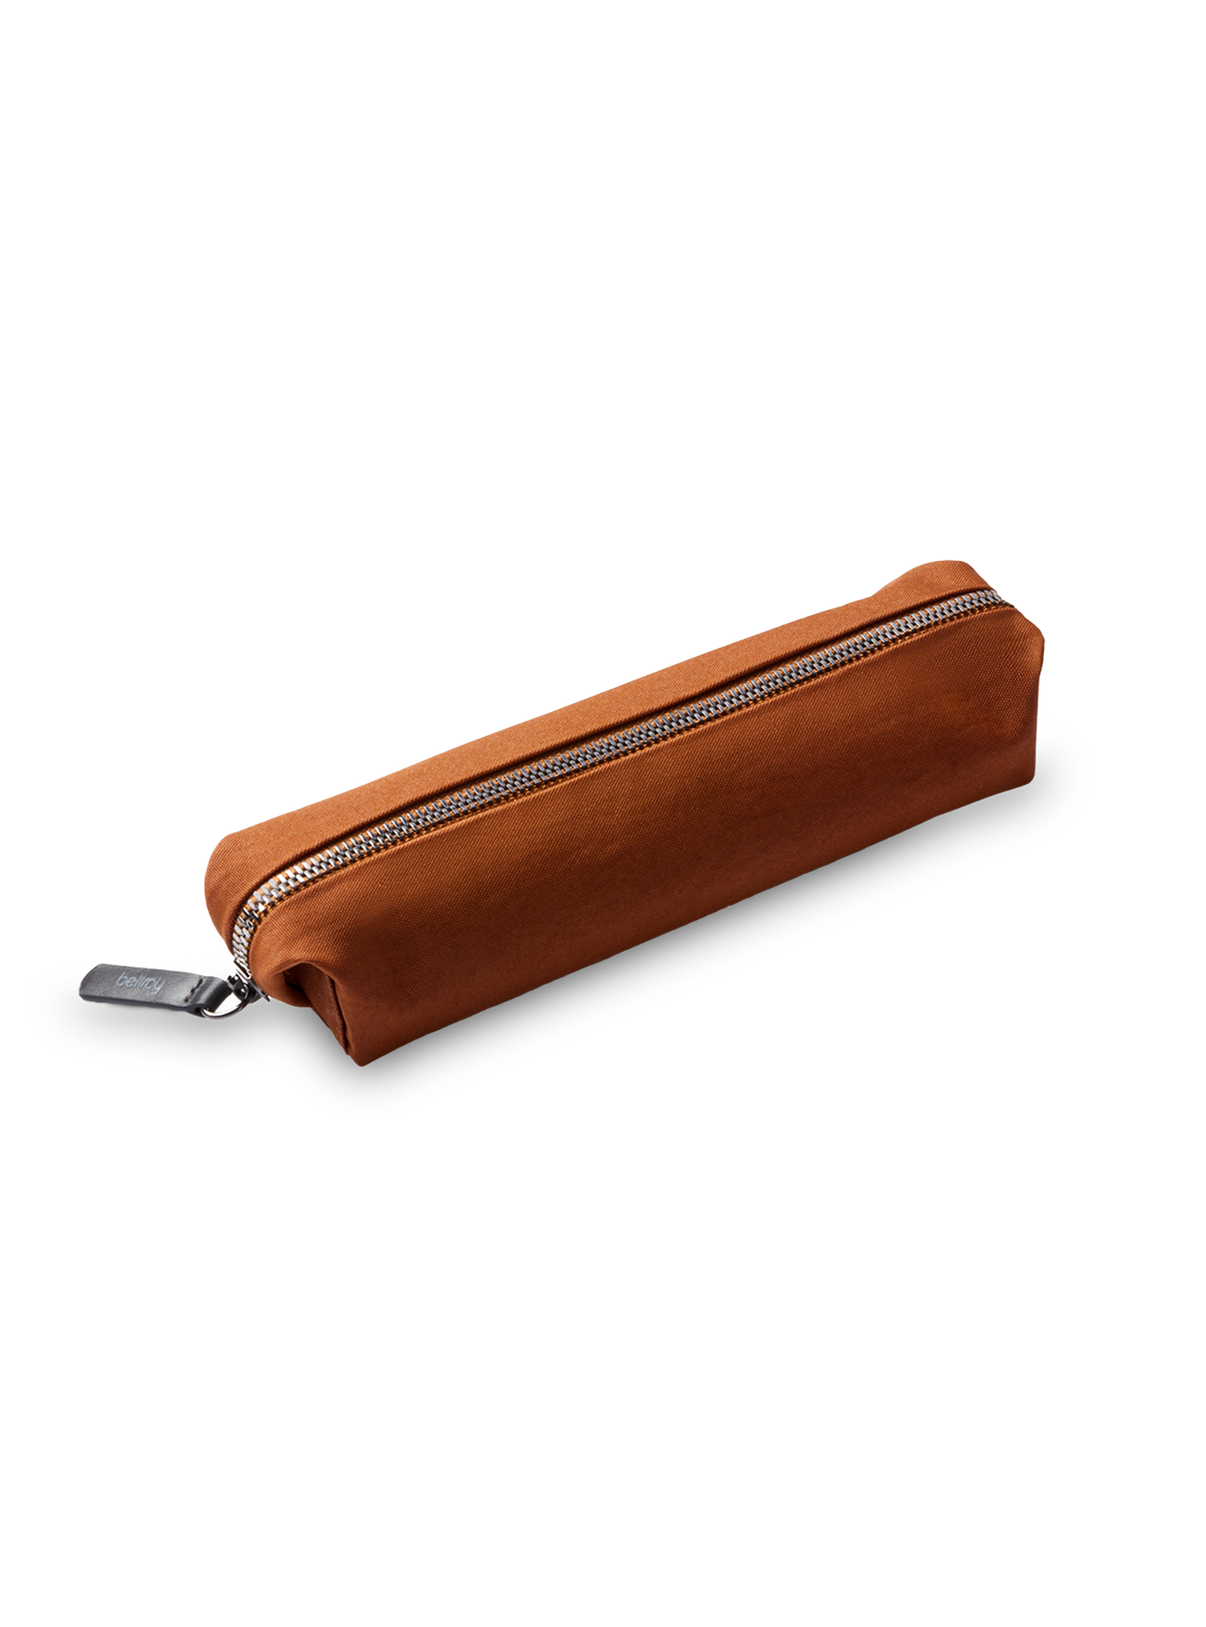 Bellroy Pencil Case product image zipped || Bronze